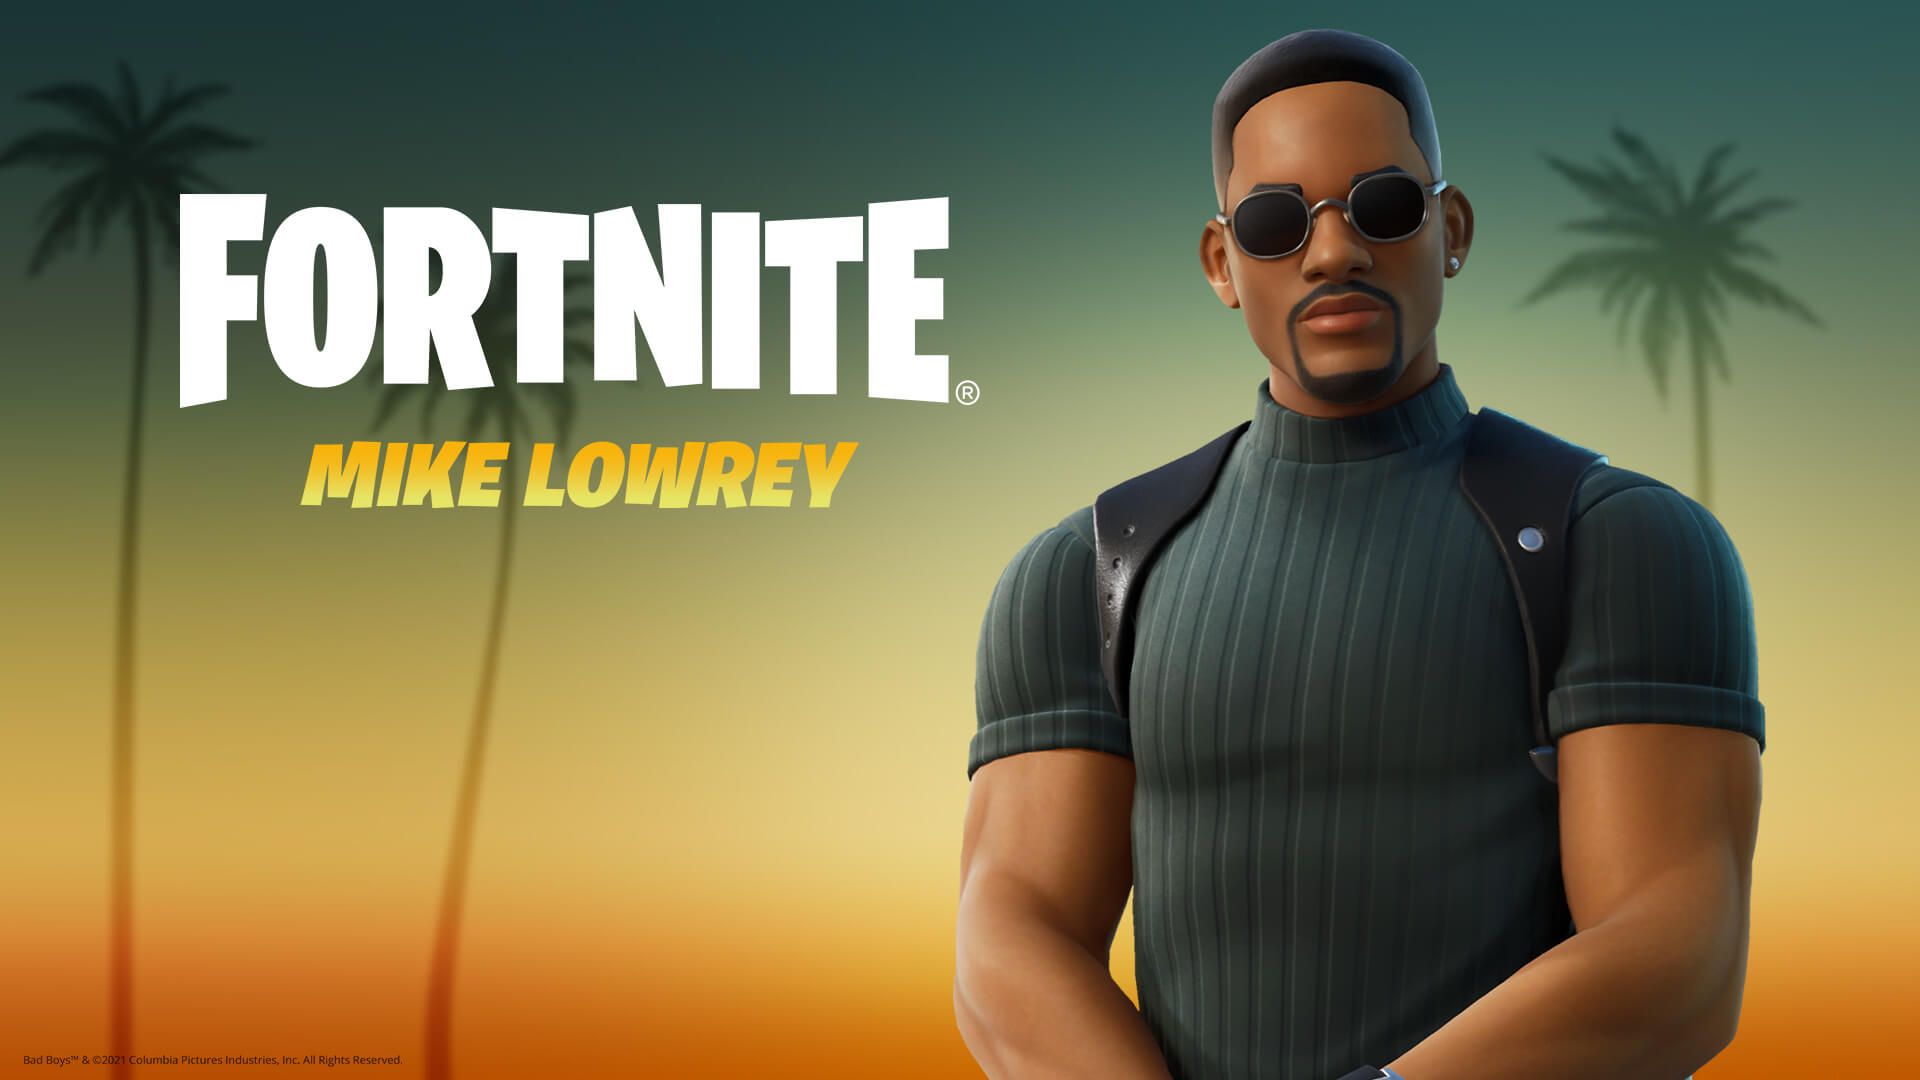 Will Smith's Mike Lowery has arrived in Fortnite